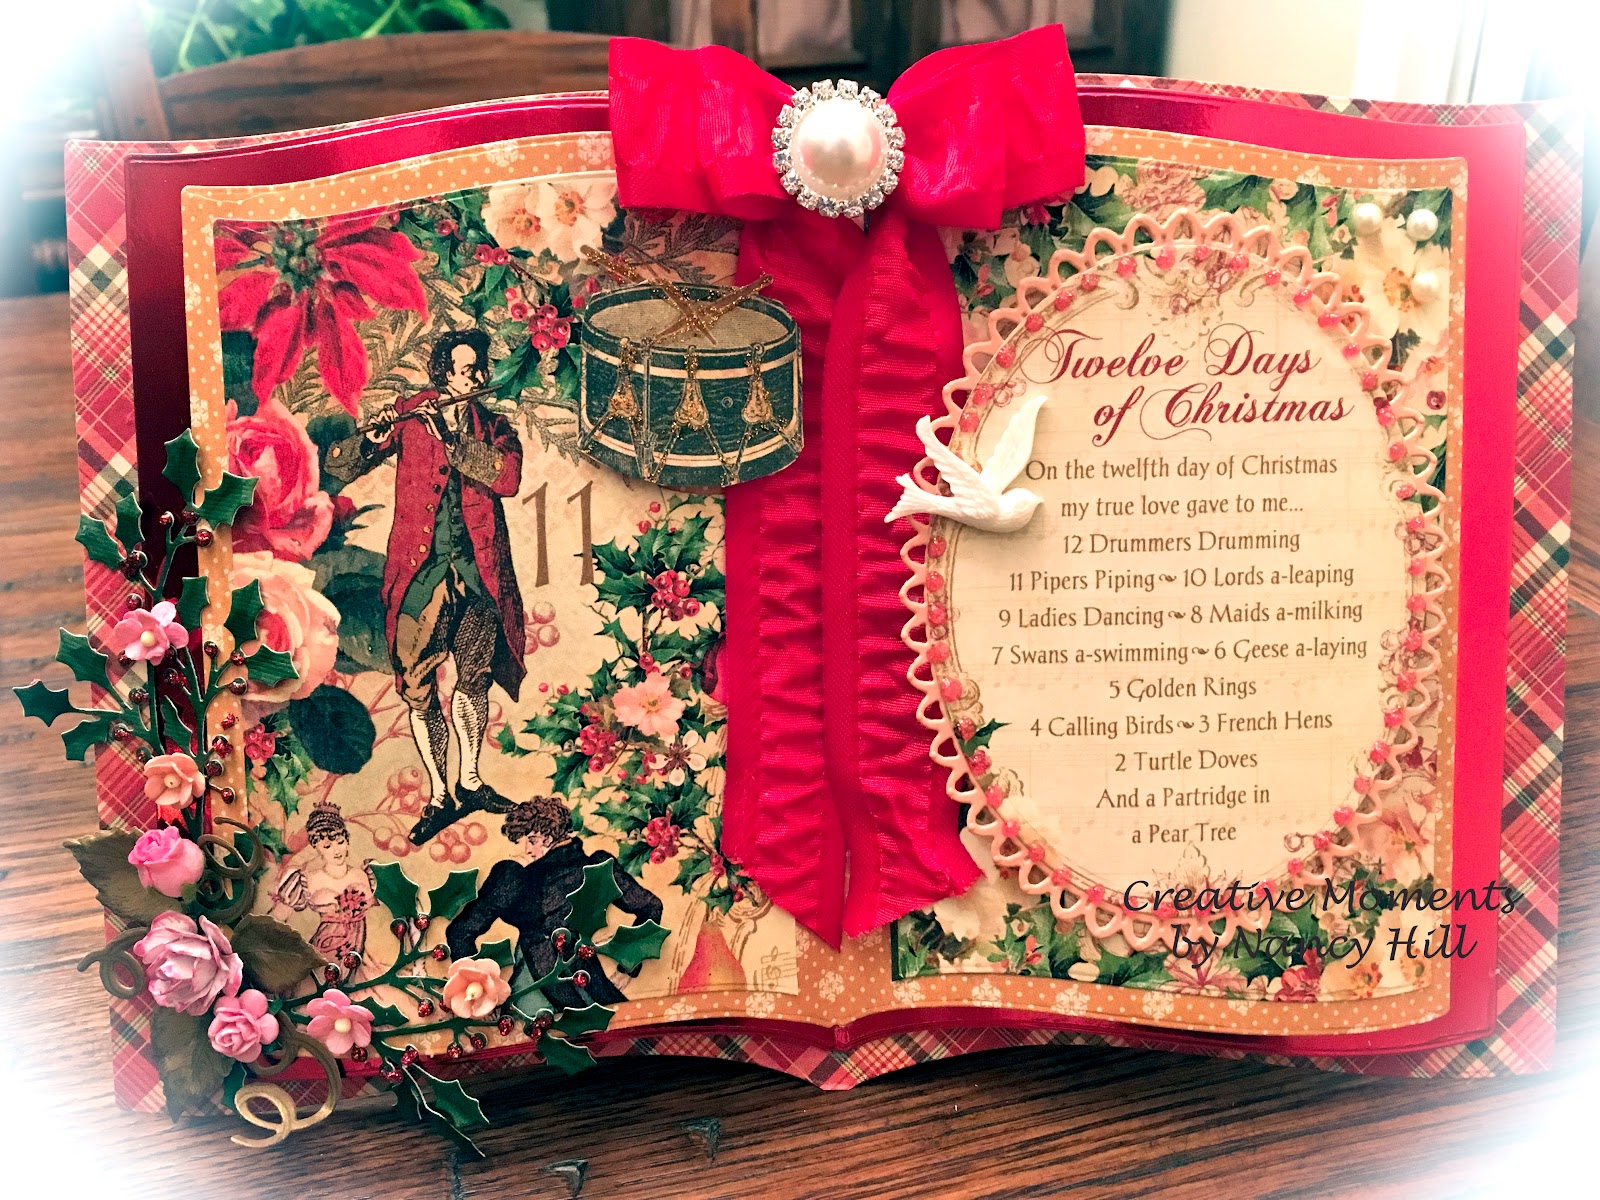 Creative Moments by Nancy Hill: Twelve Days of Christmas Book Card